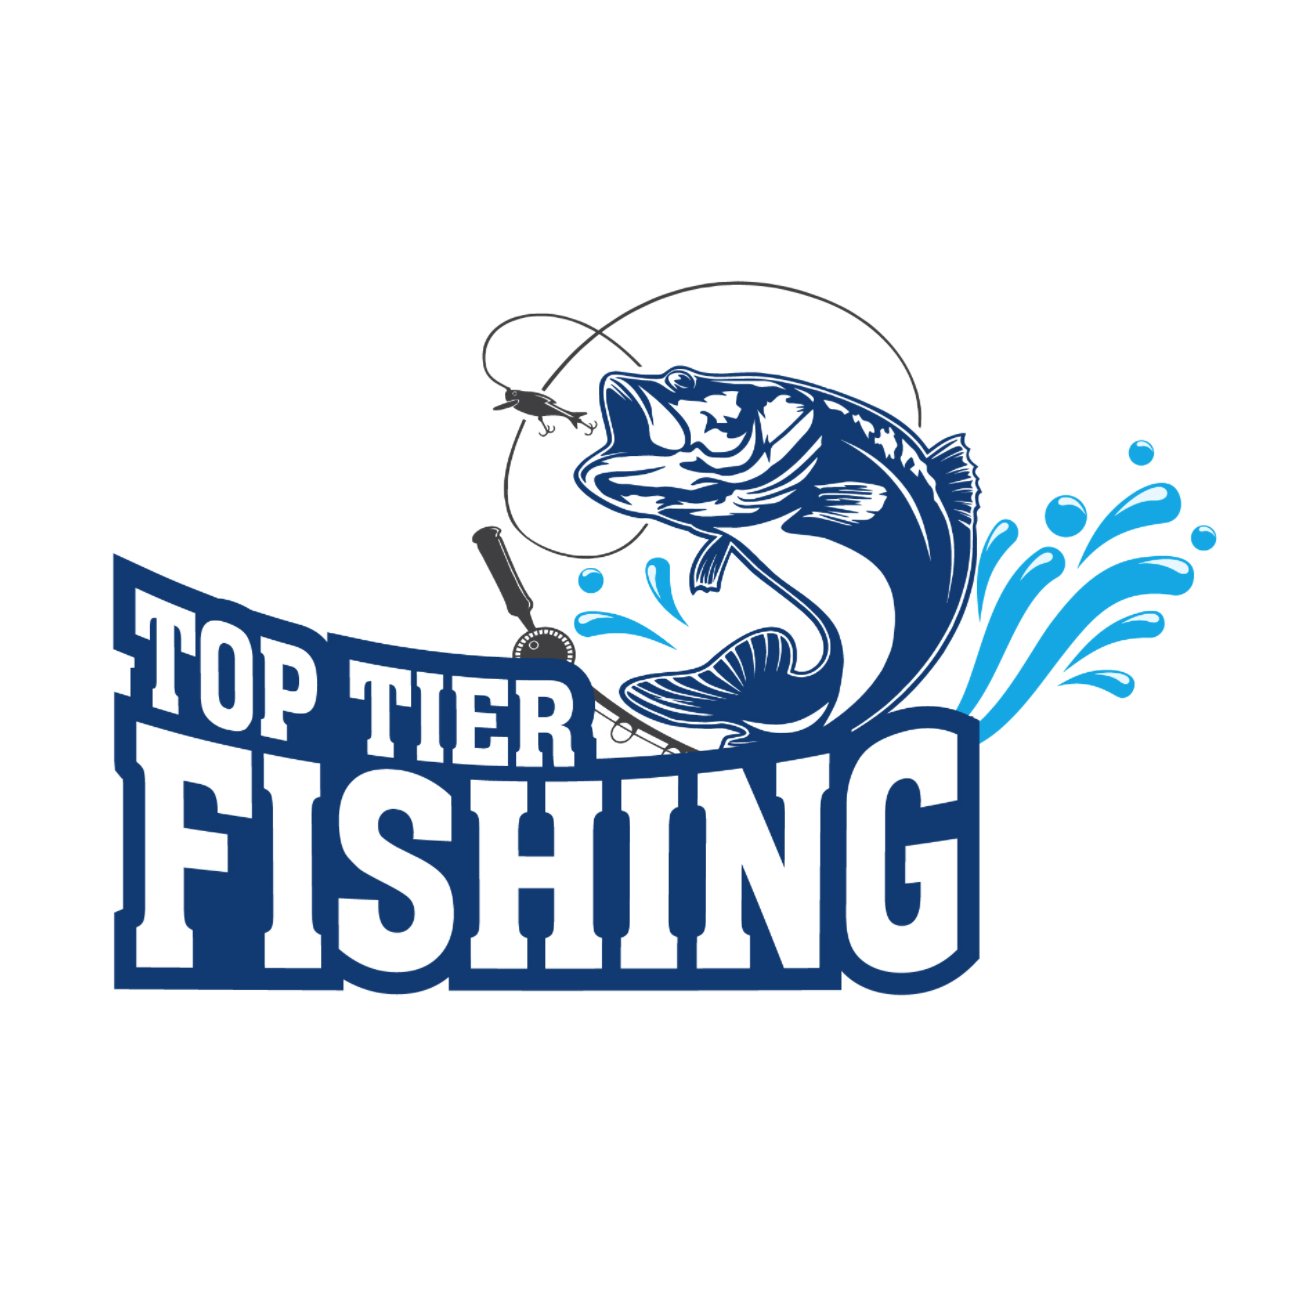 Get recruited by the nations top bass fishing colleges and universities. Check out our website https://t.co/Tjlmk52LuM